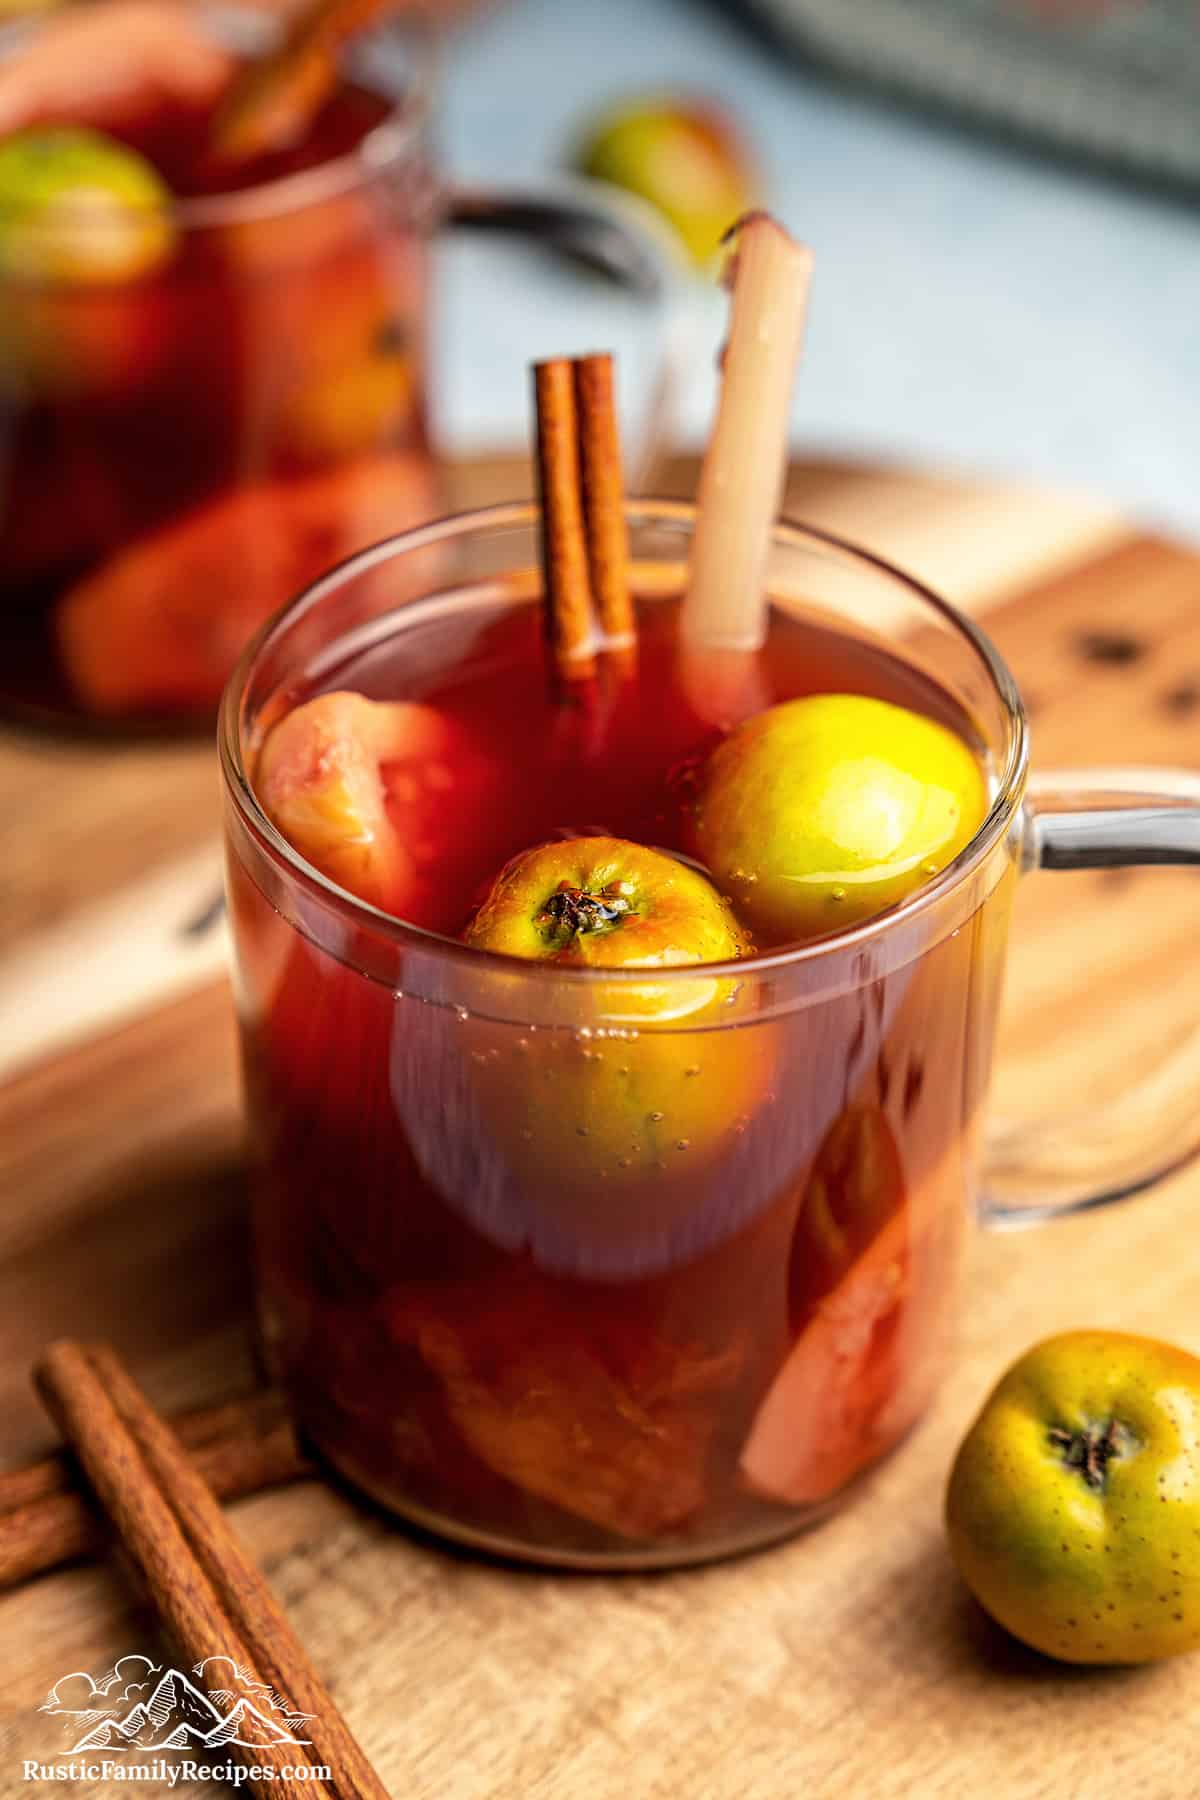 Ponche de frutas navideño in a glass cup with fruit and a cinnamon stick.